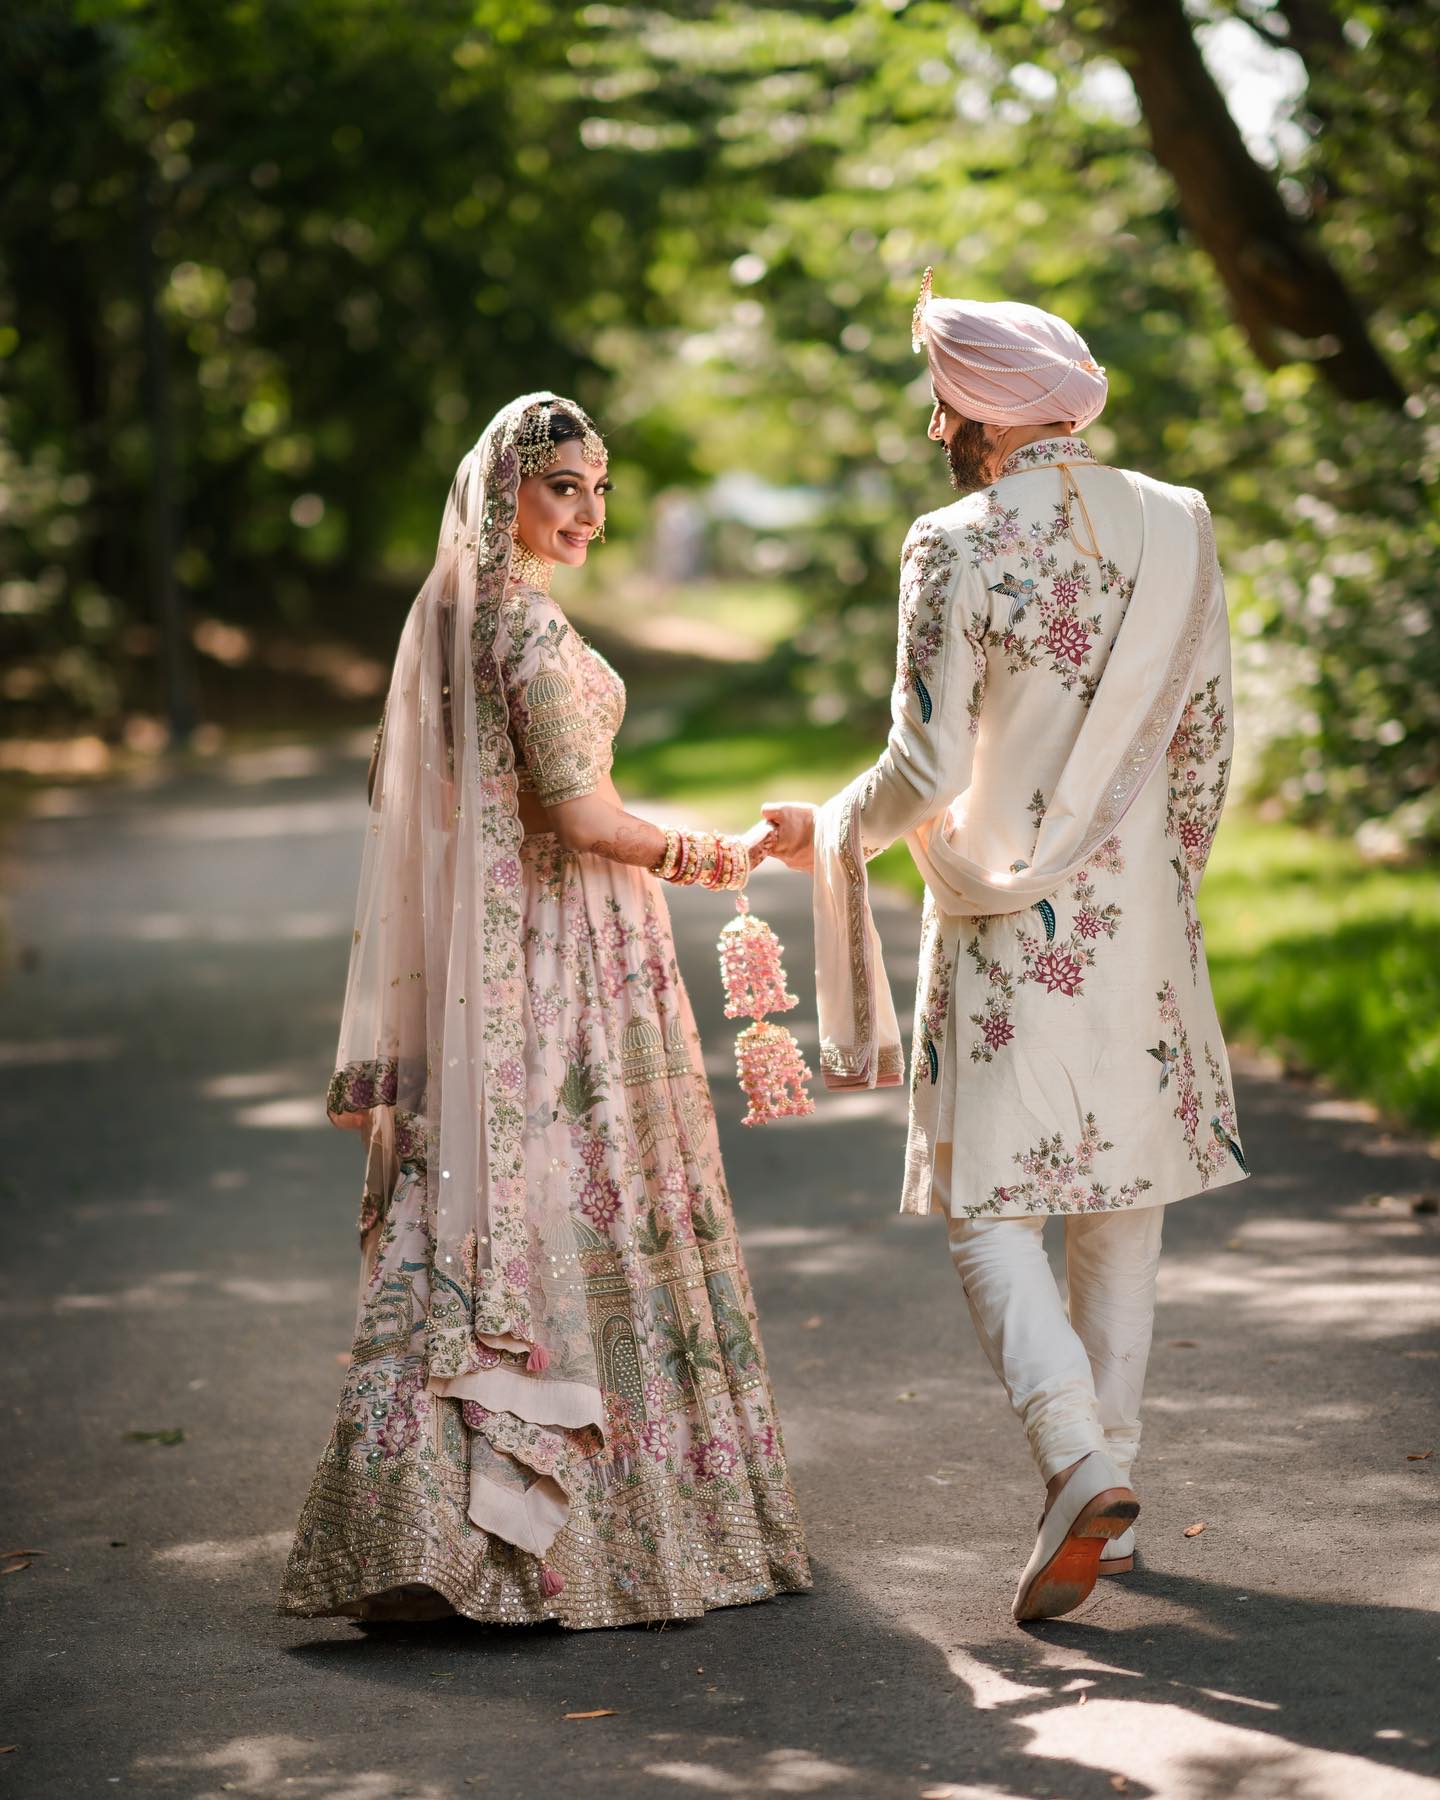 Producer Producer Aman Gill Gets Married To Amrit Berar In A Sikh Wedding